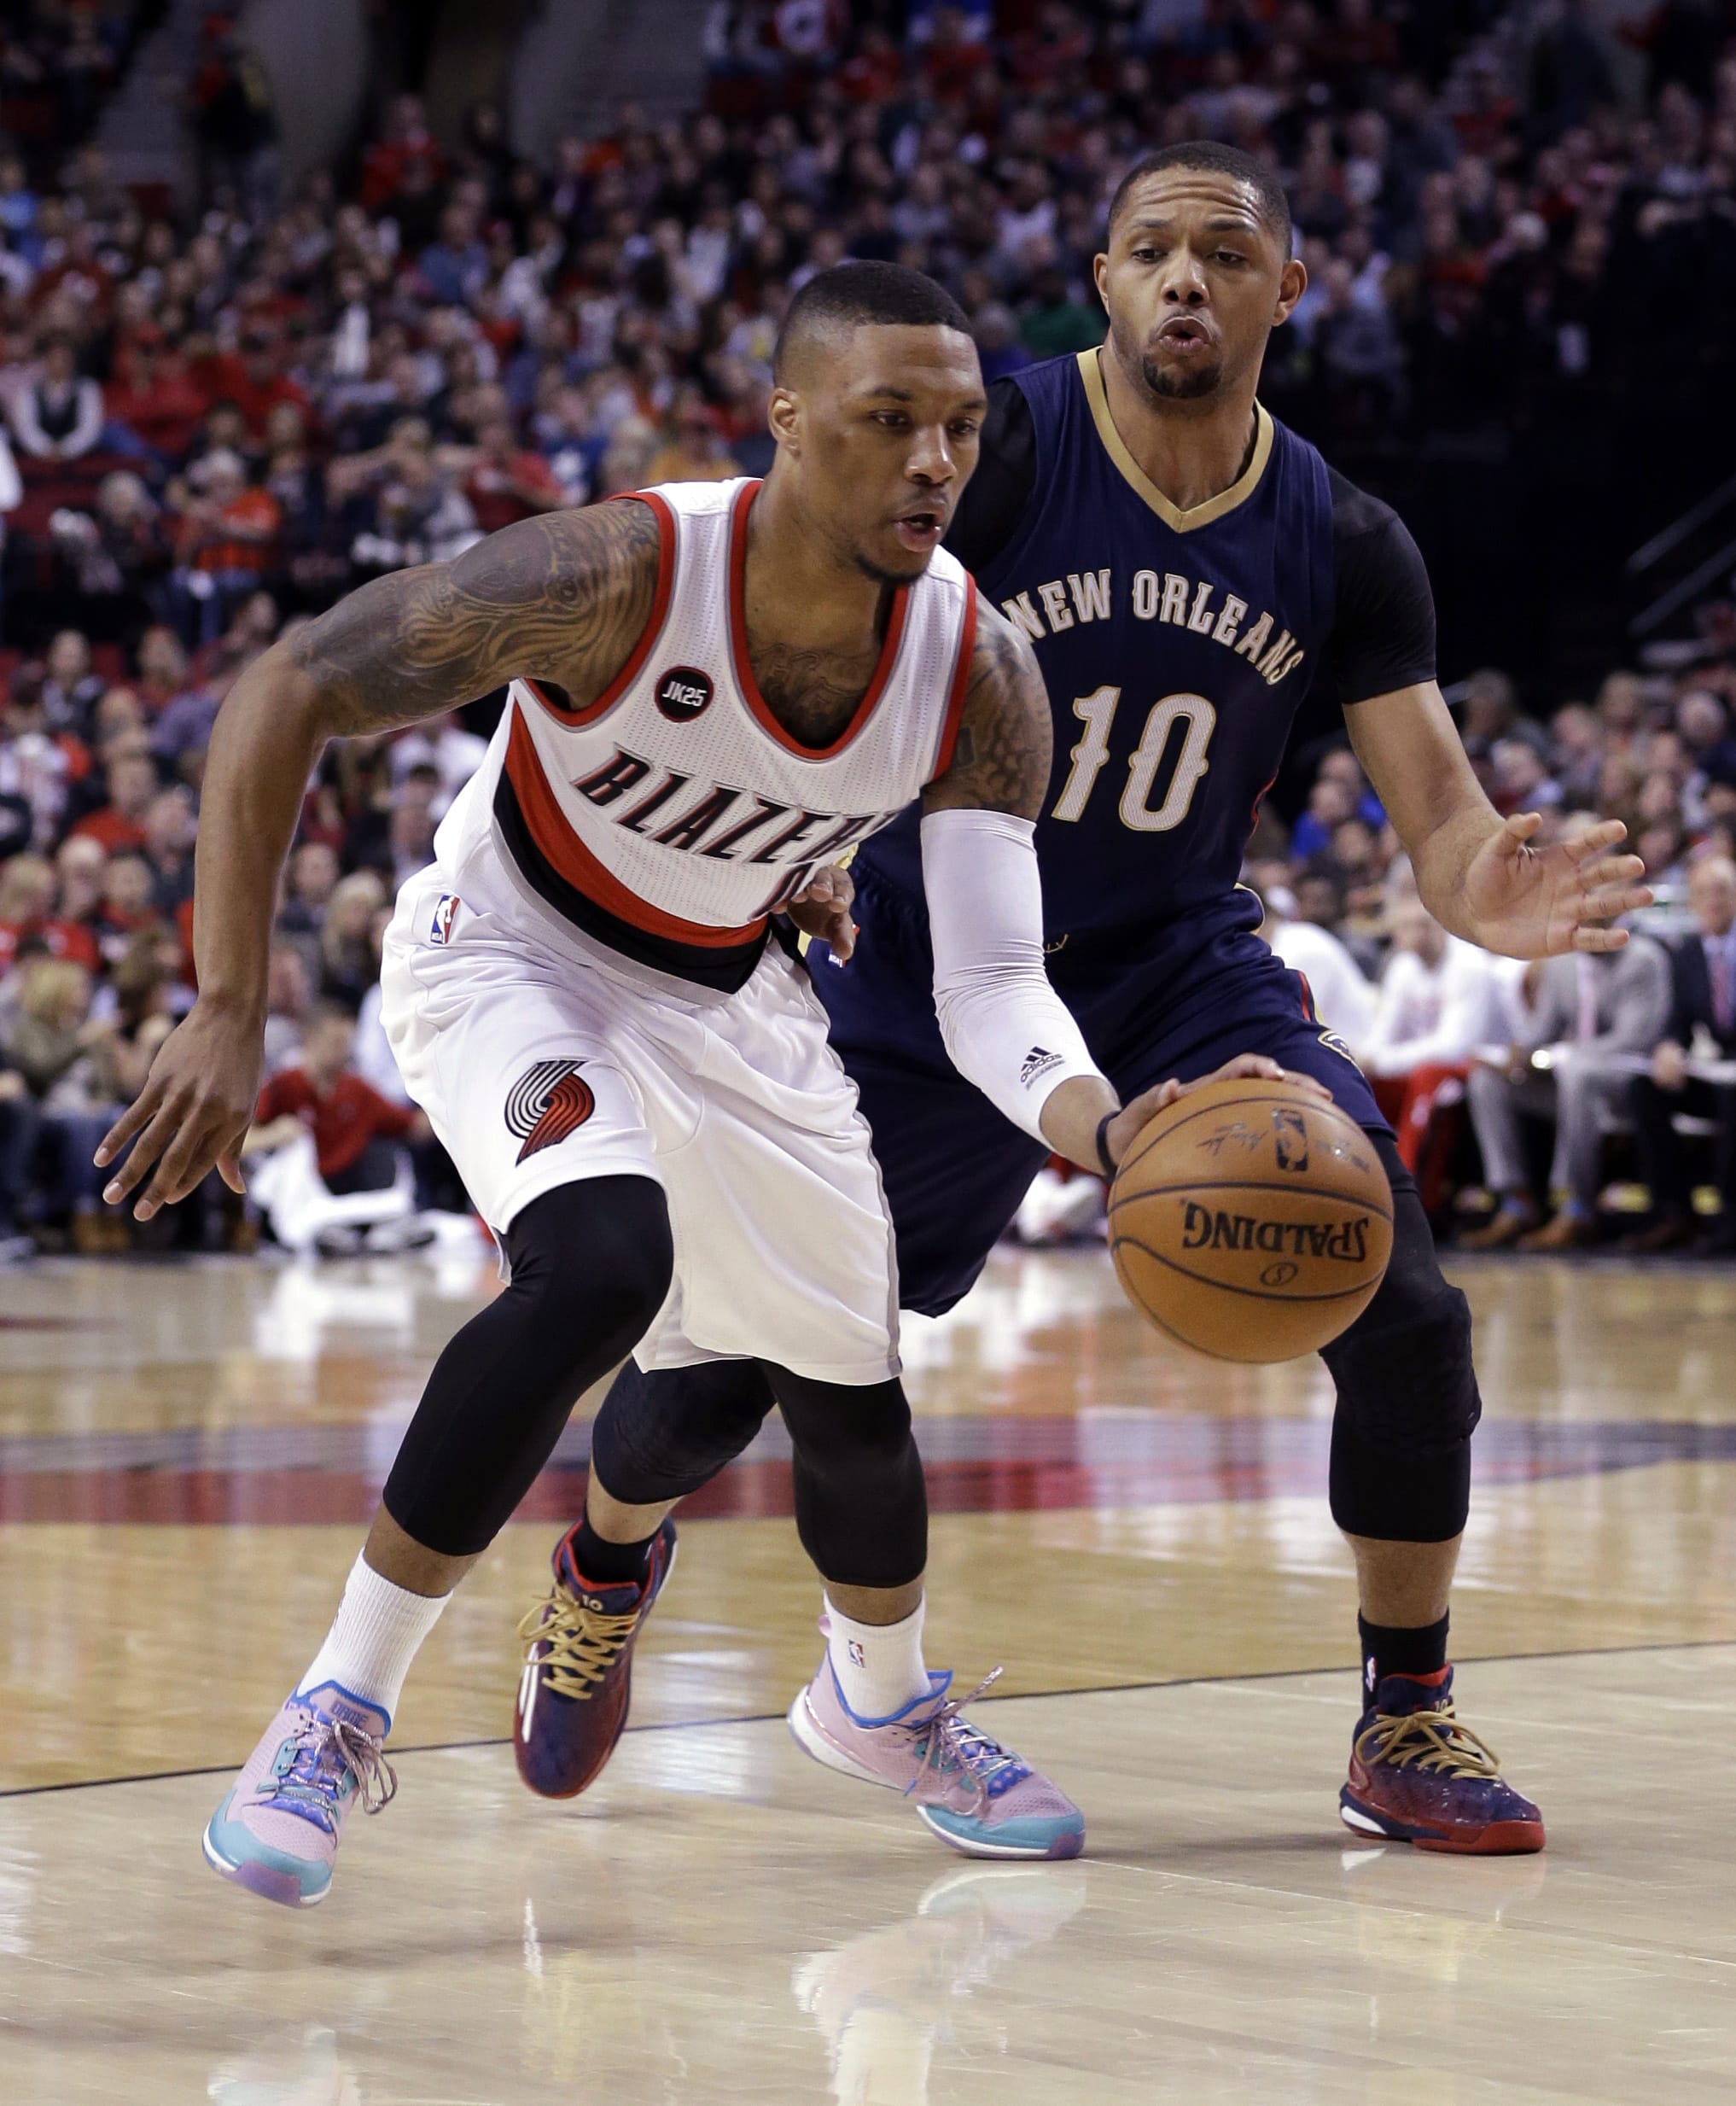 Portland Trail Blazers guard Damian Lillard, left, drives past New Orleans Pelicans guard Eric Gordon during the first half of an NBA basketball game in Portland, Ore., Saturday, April 4, 2015.